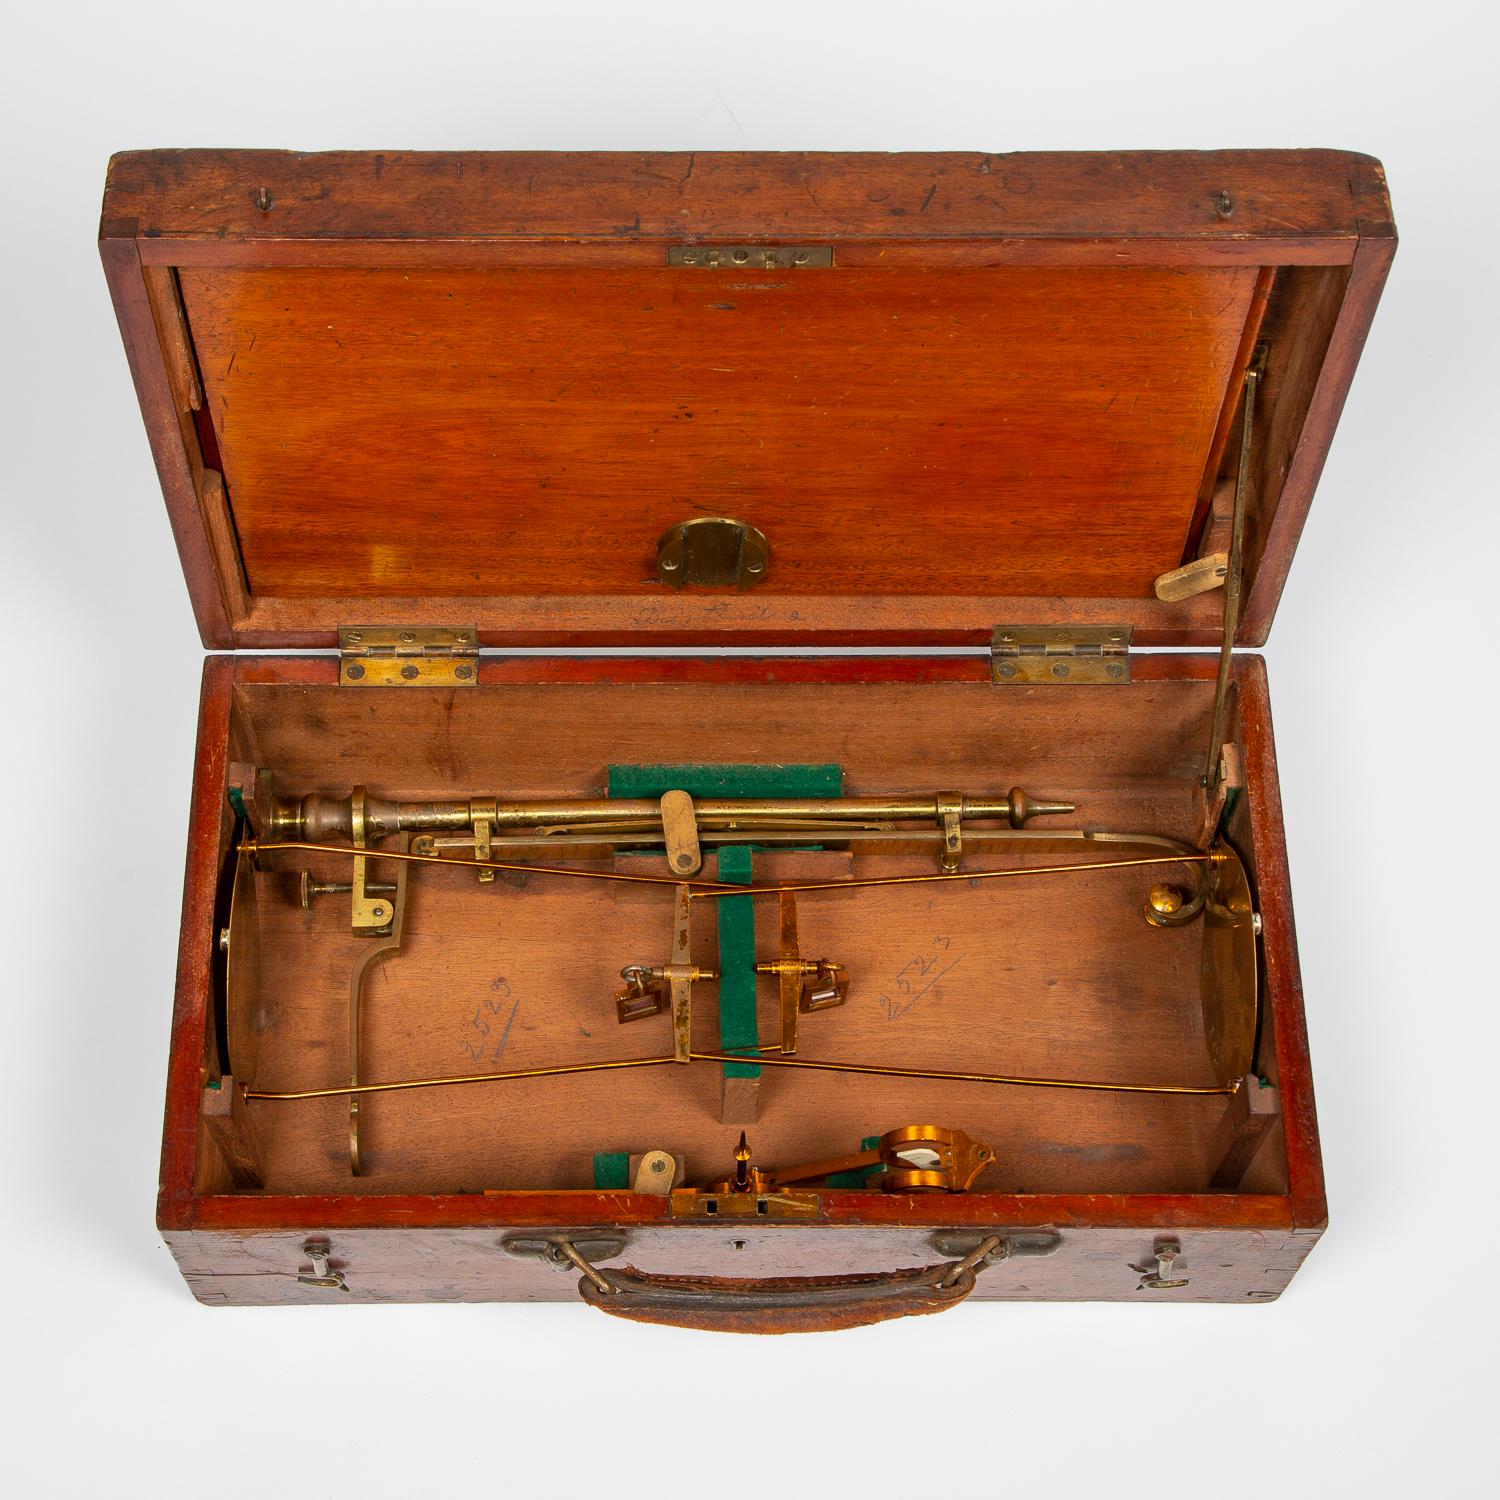 A portable set of beam scales made for the County of Kent by W & T Avery Ltd of Birmingham, circa 1898.

Marked: CAPACITY 1 LB - KENT COUNTY COUNCIL

Marked with indenture number, verification stamps and royal ciphers.

Height 19 inches - 48.5